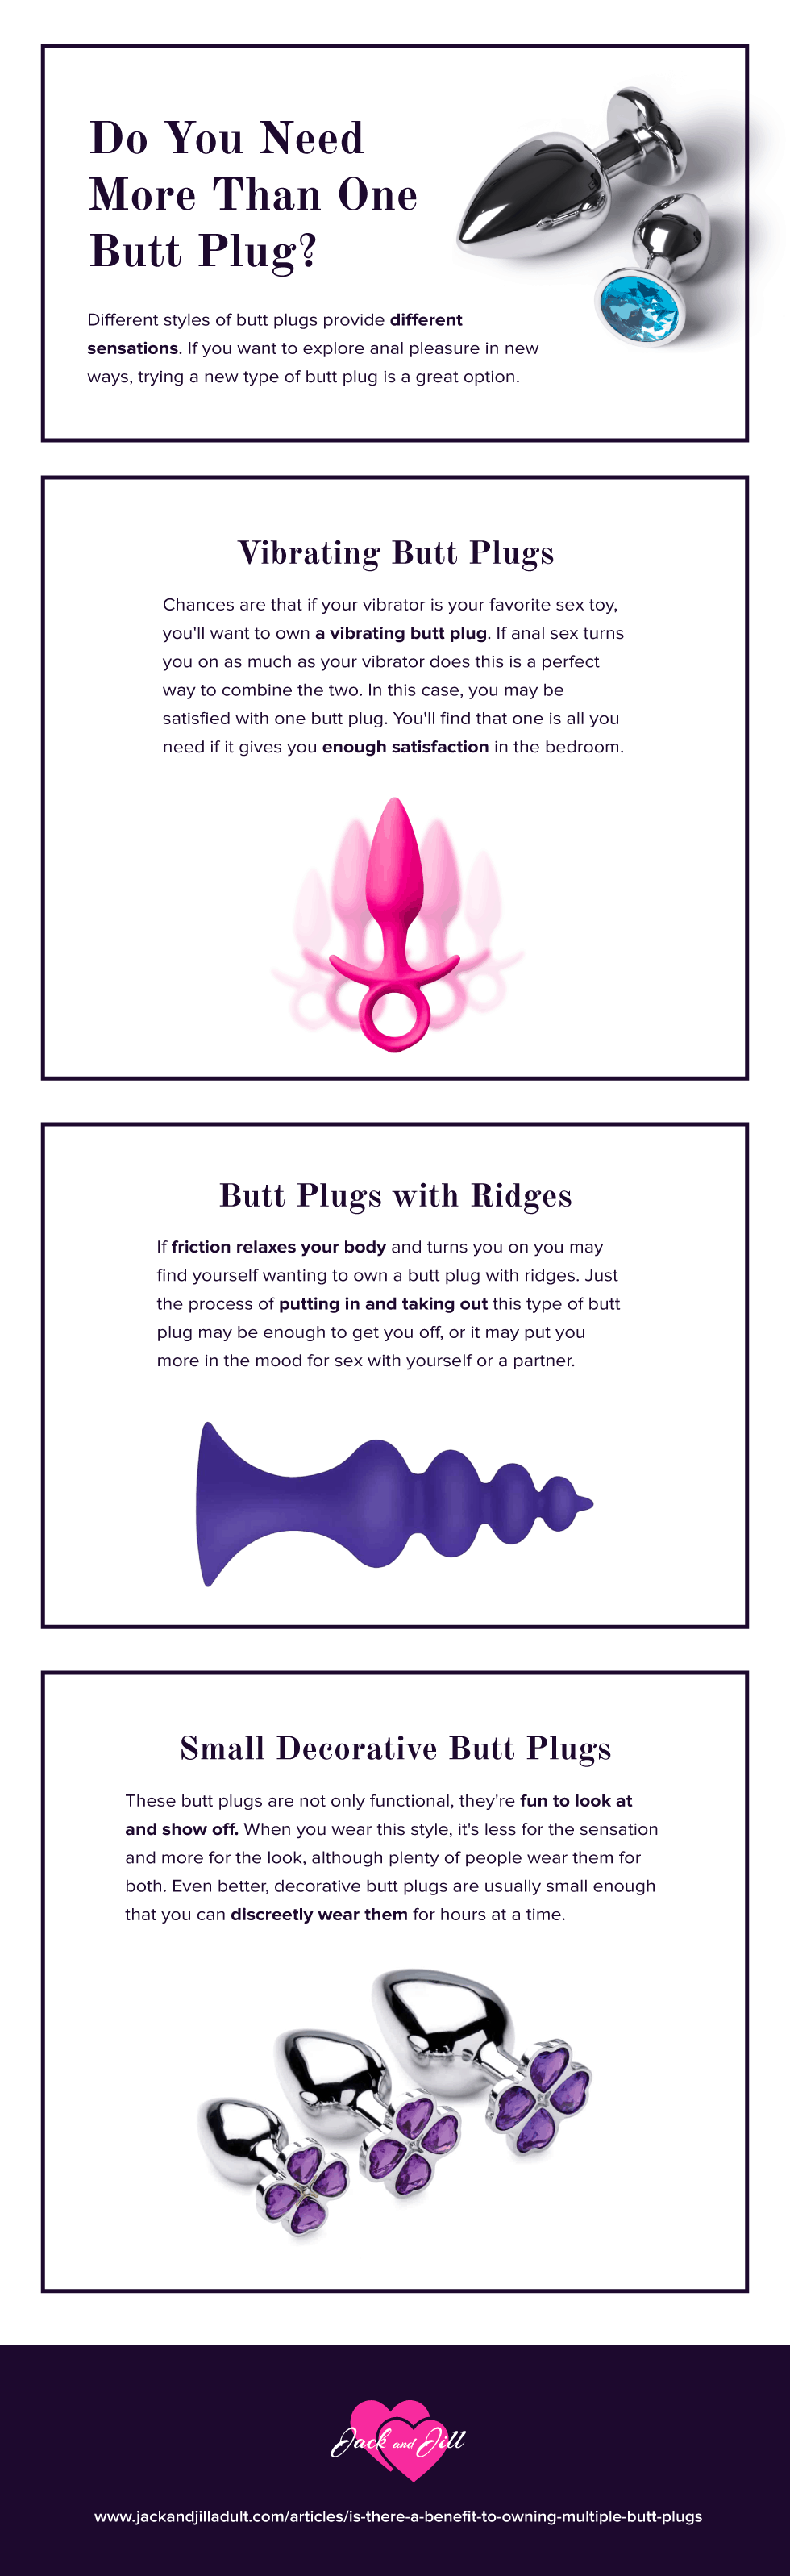 Infographic for Is There a Benefit To Owning Multiple Butt Plugs?